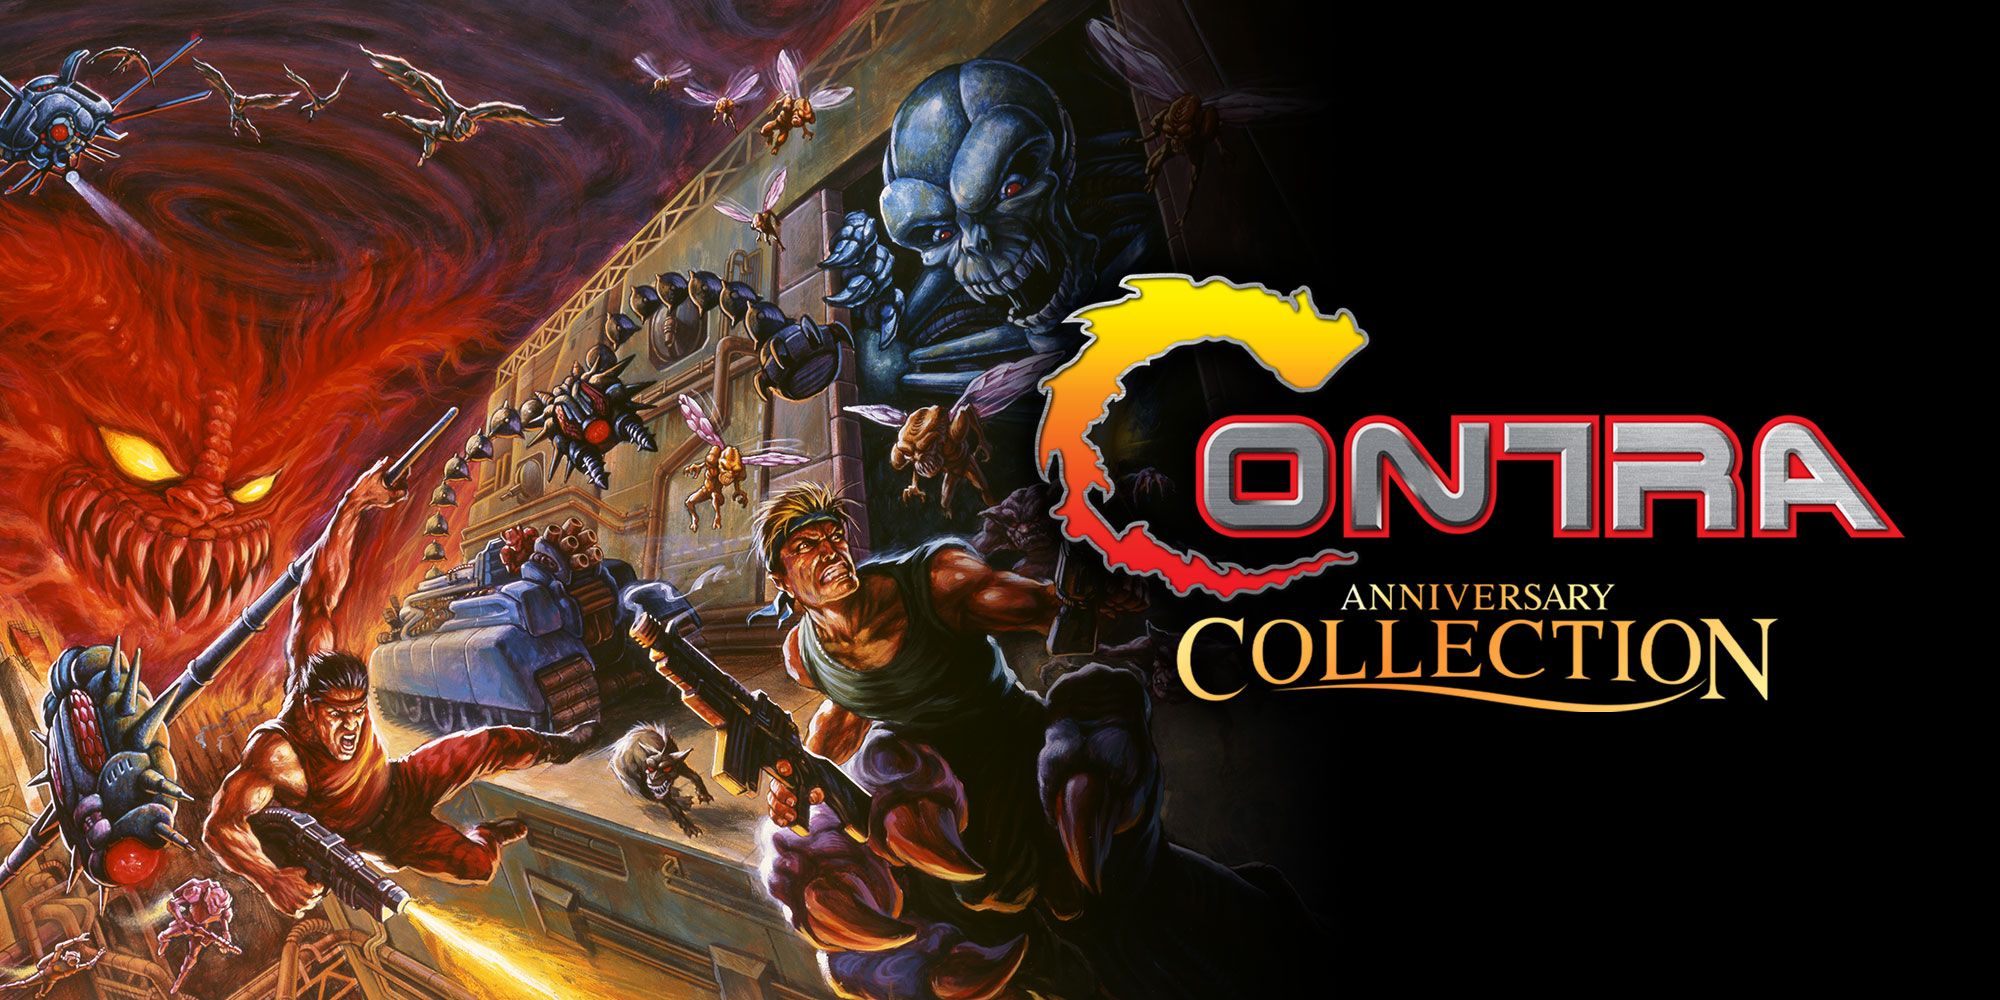 Image Showing The Cover For The Contra Anniversary Collection